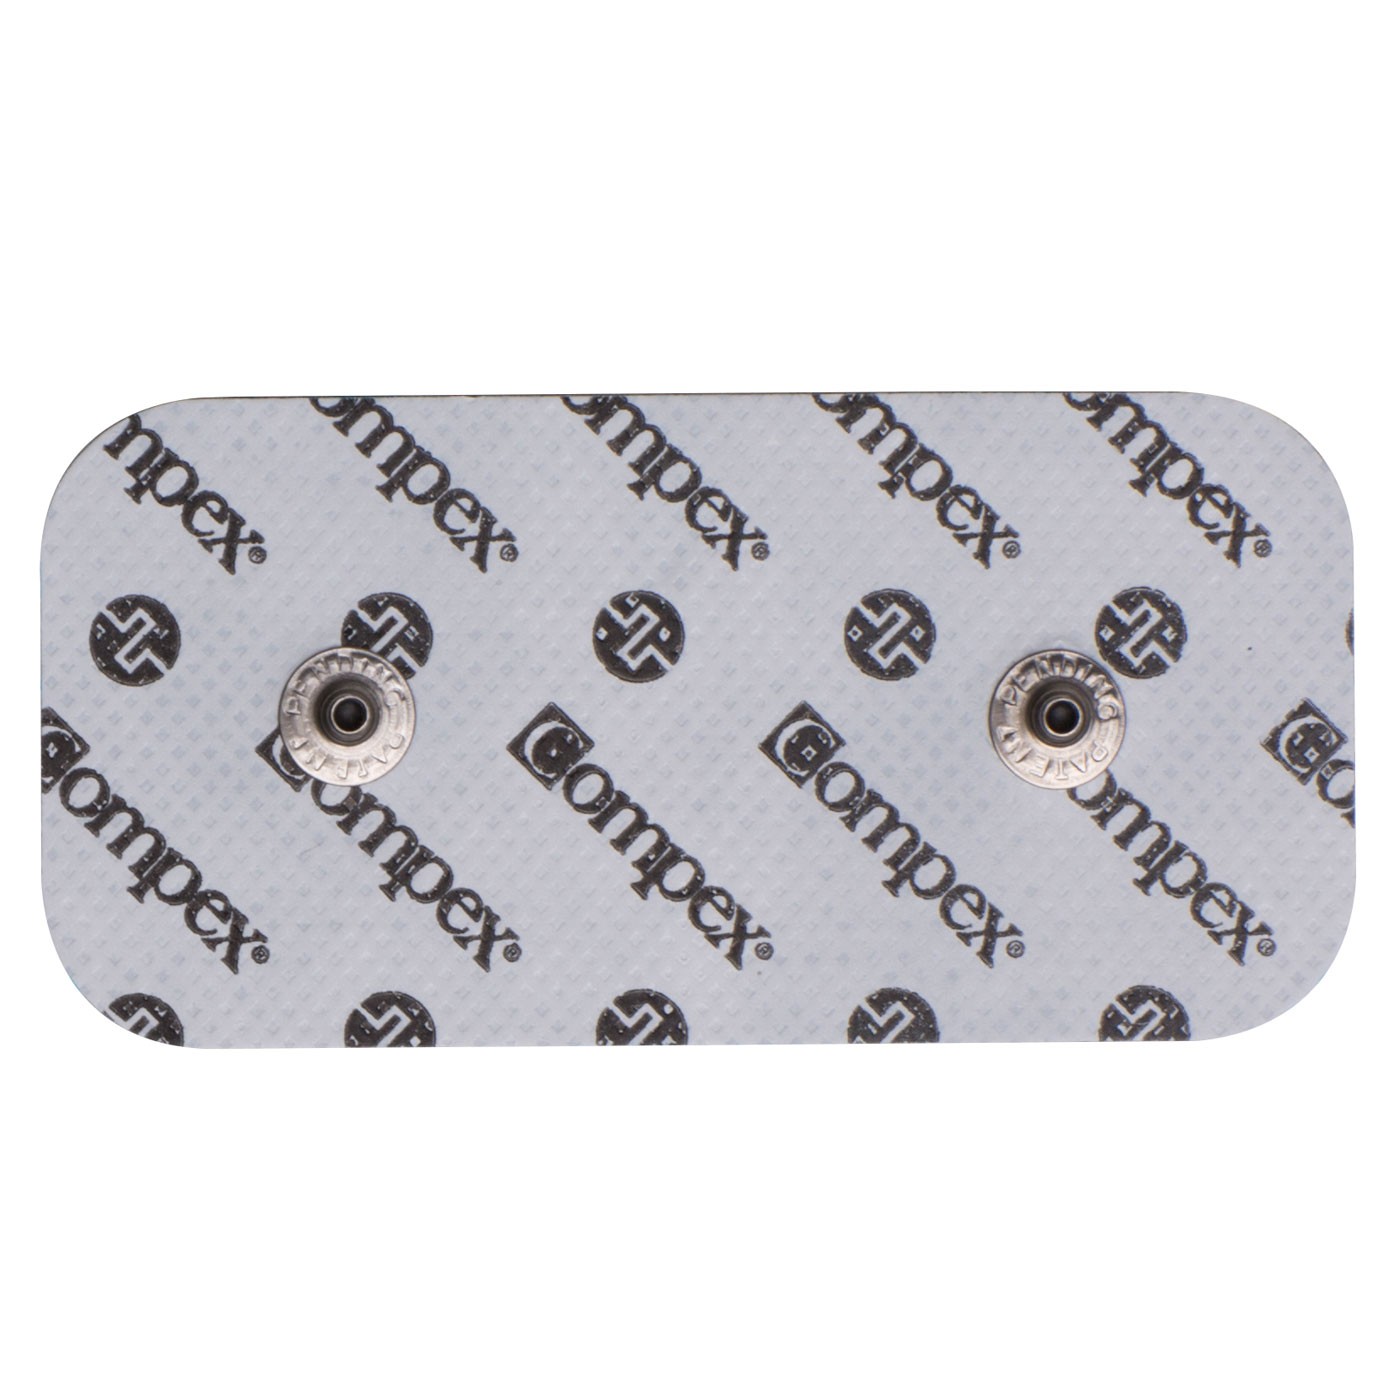 COMPEX EASY SNAP ELECTRODES 2IN X 4IN - WHITE